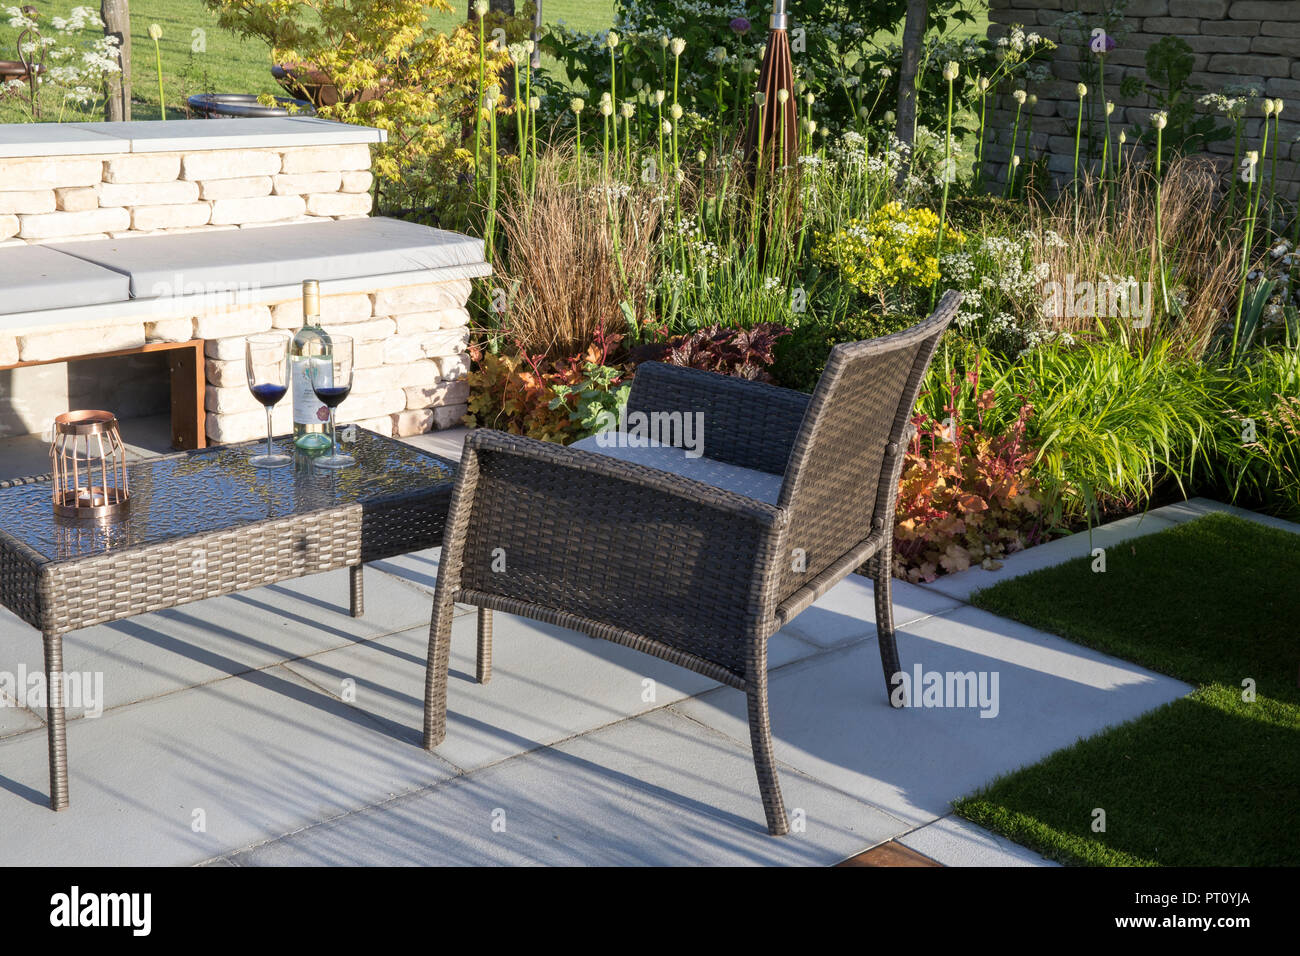 Small urban garden with stone patio with wicker garden patio furniture, coffee table and chair, stone bench, alliums, grasses, spring England UK Stock Photo